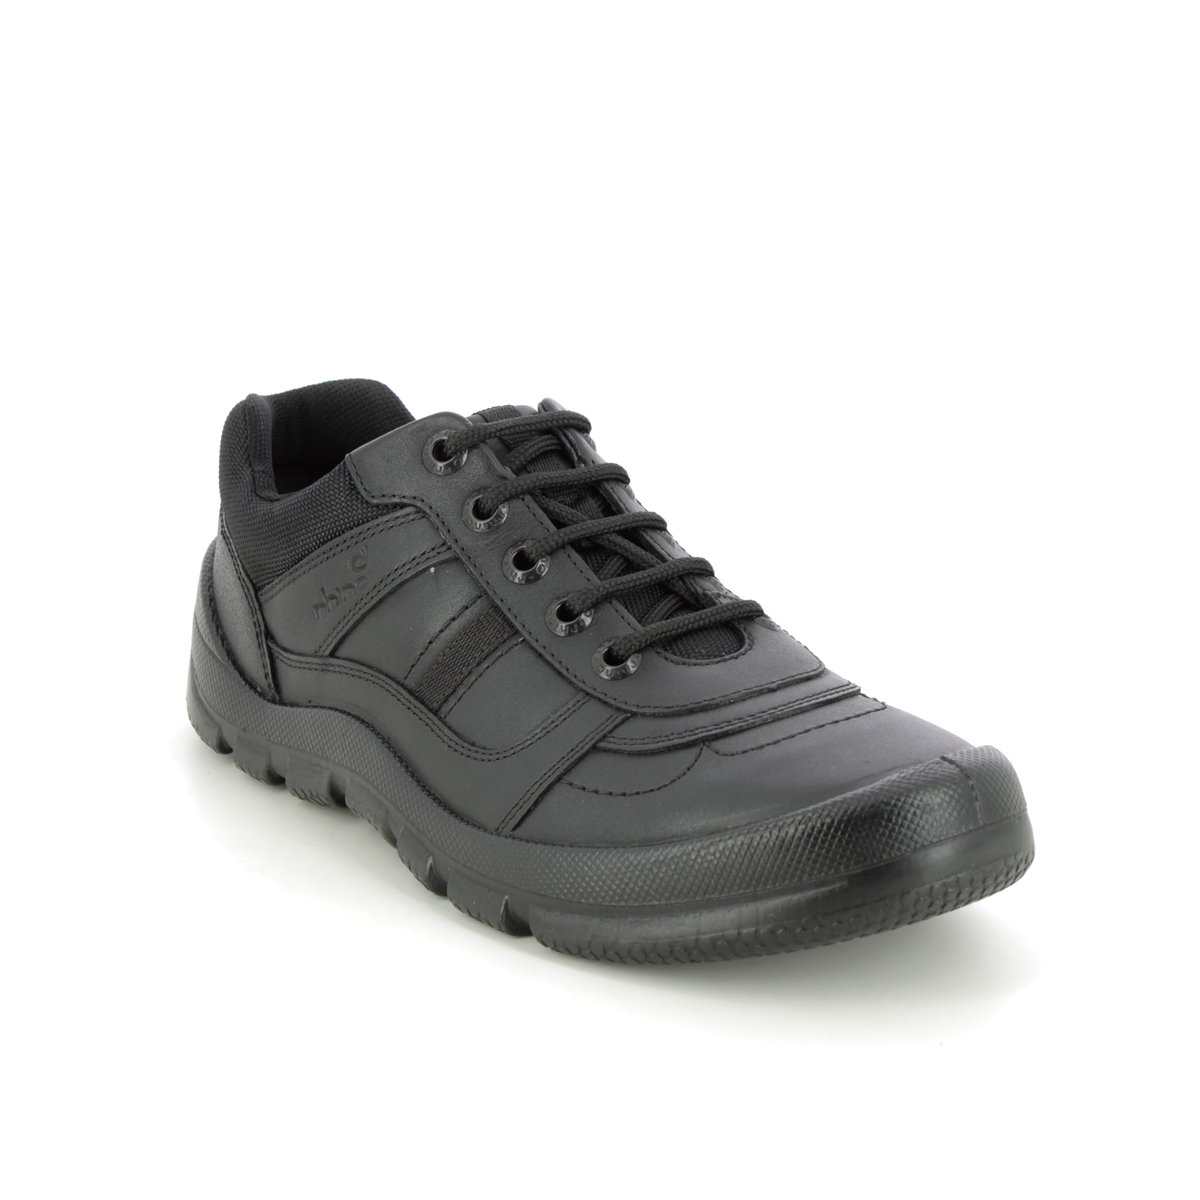 Start Rite Rhino Warrior Lace Black leather Kids Boys Shoes 8238-76F in a Plain Leather in Size 4.5